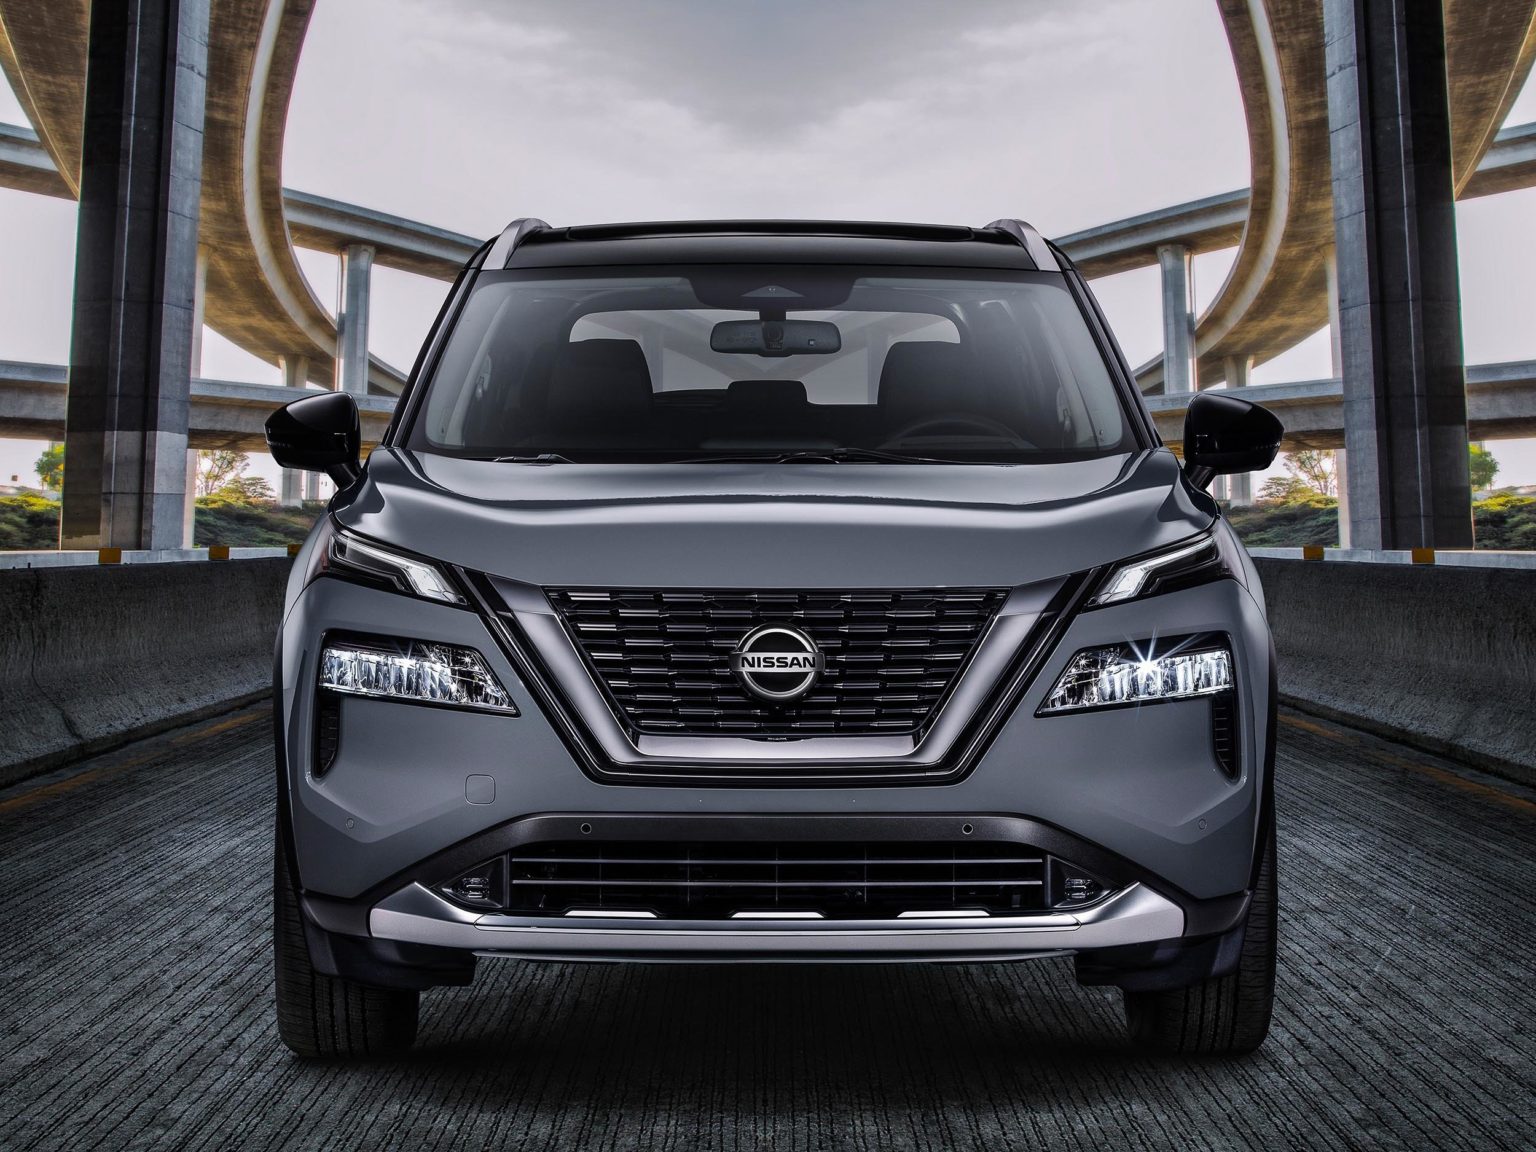 Nissan has completely redesigned the Rogue for the 2021 model year.